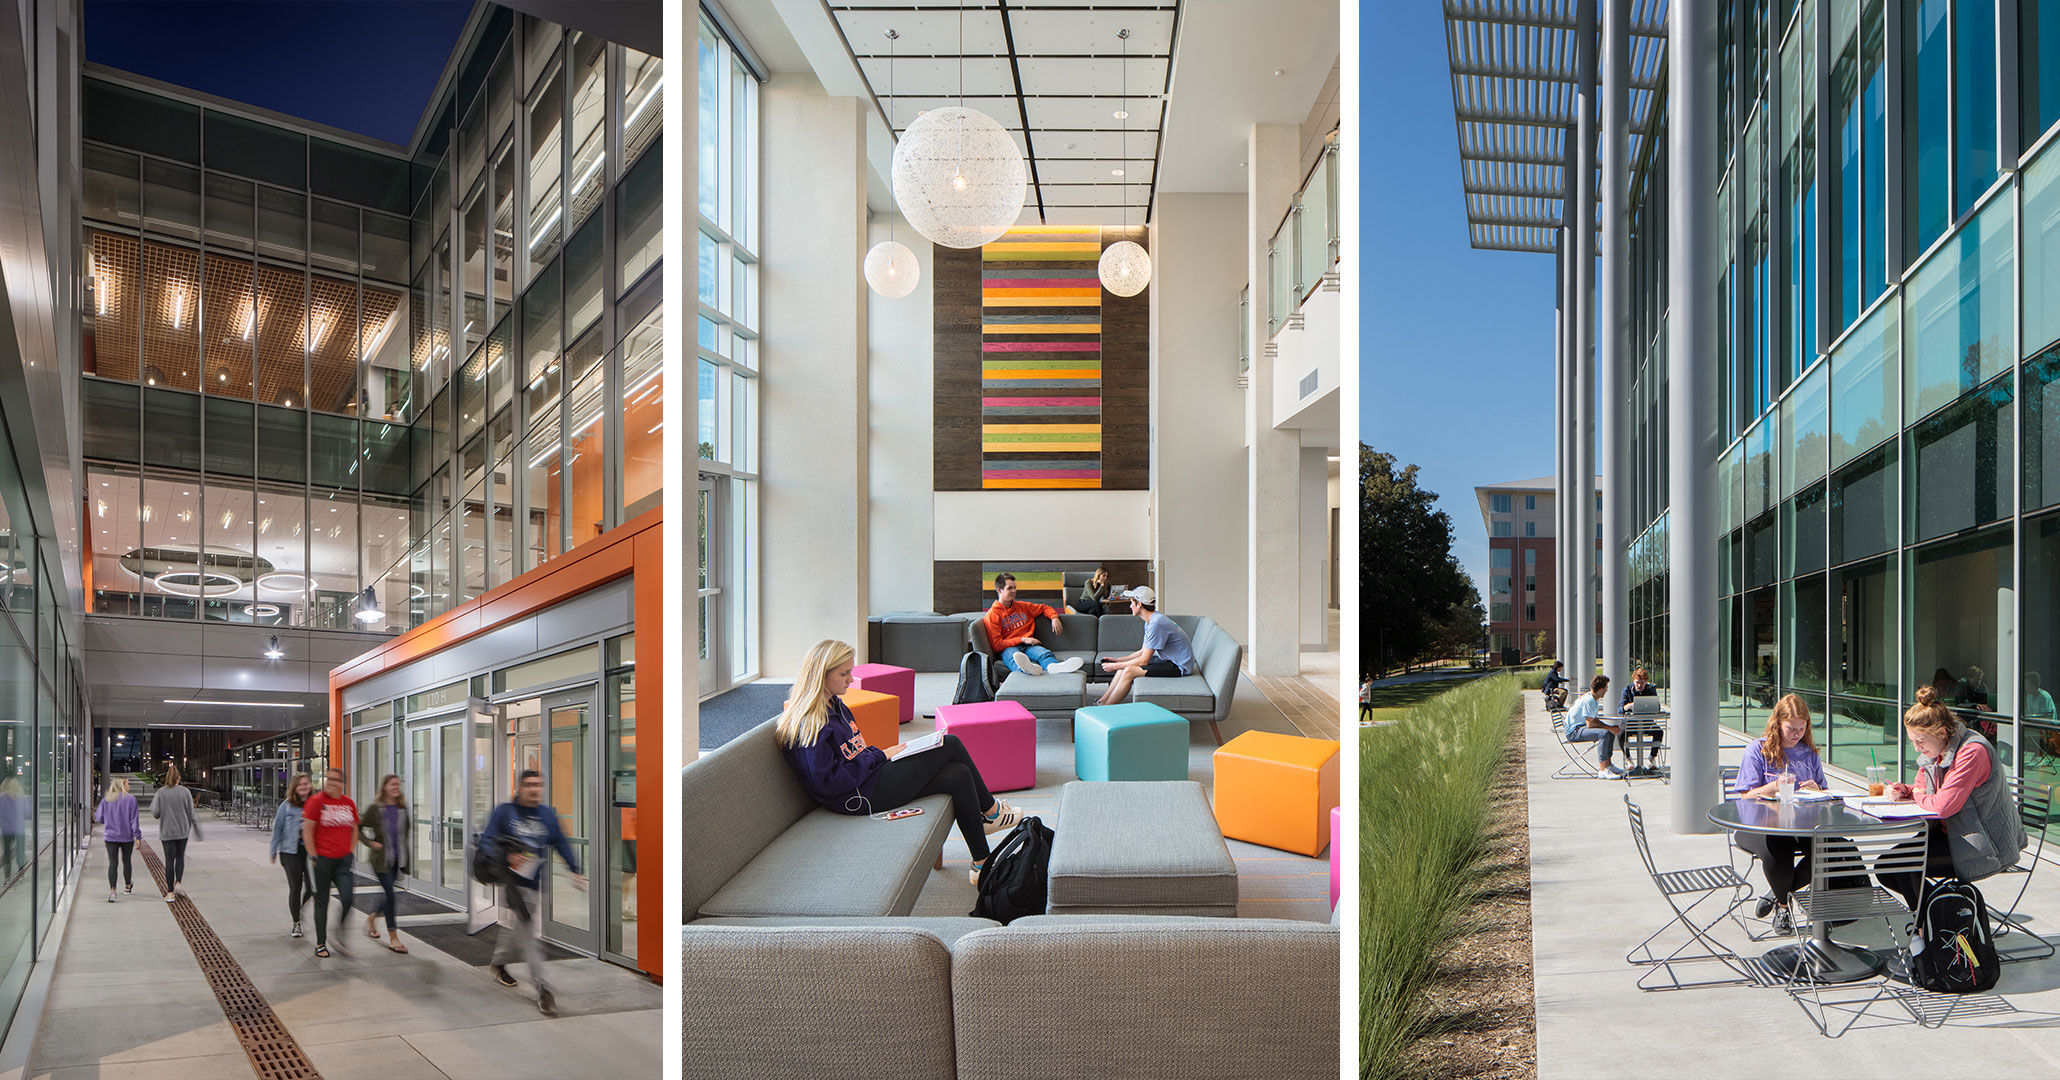 Clemson University worked with Boudreaux architects to design flexible student living spaces.